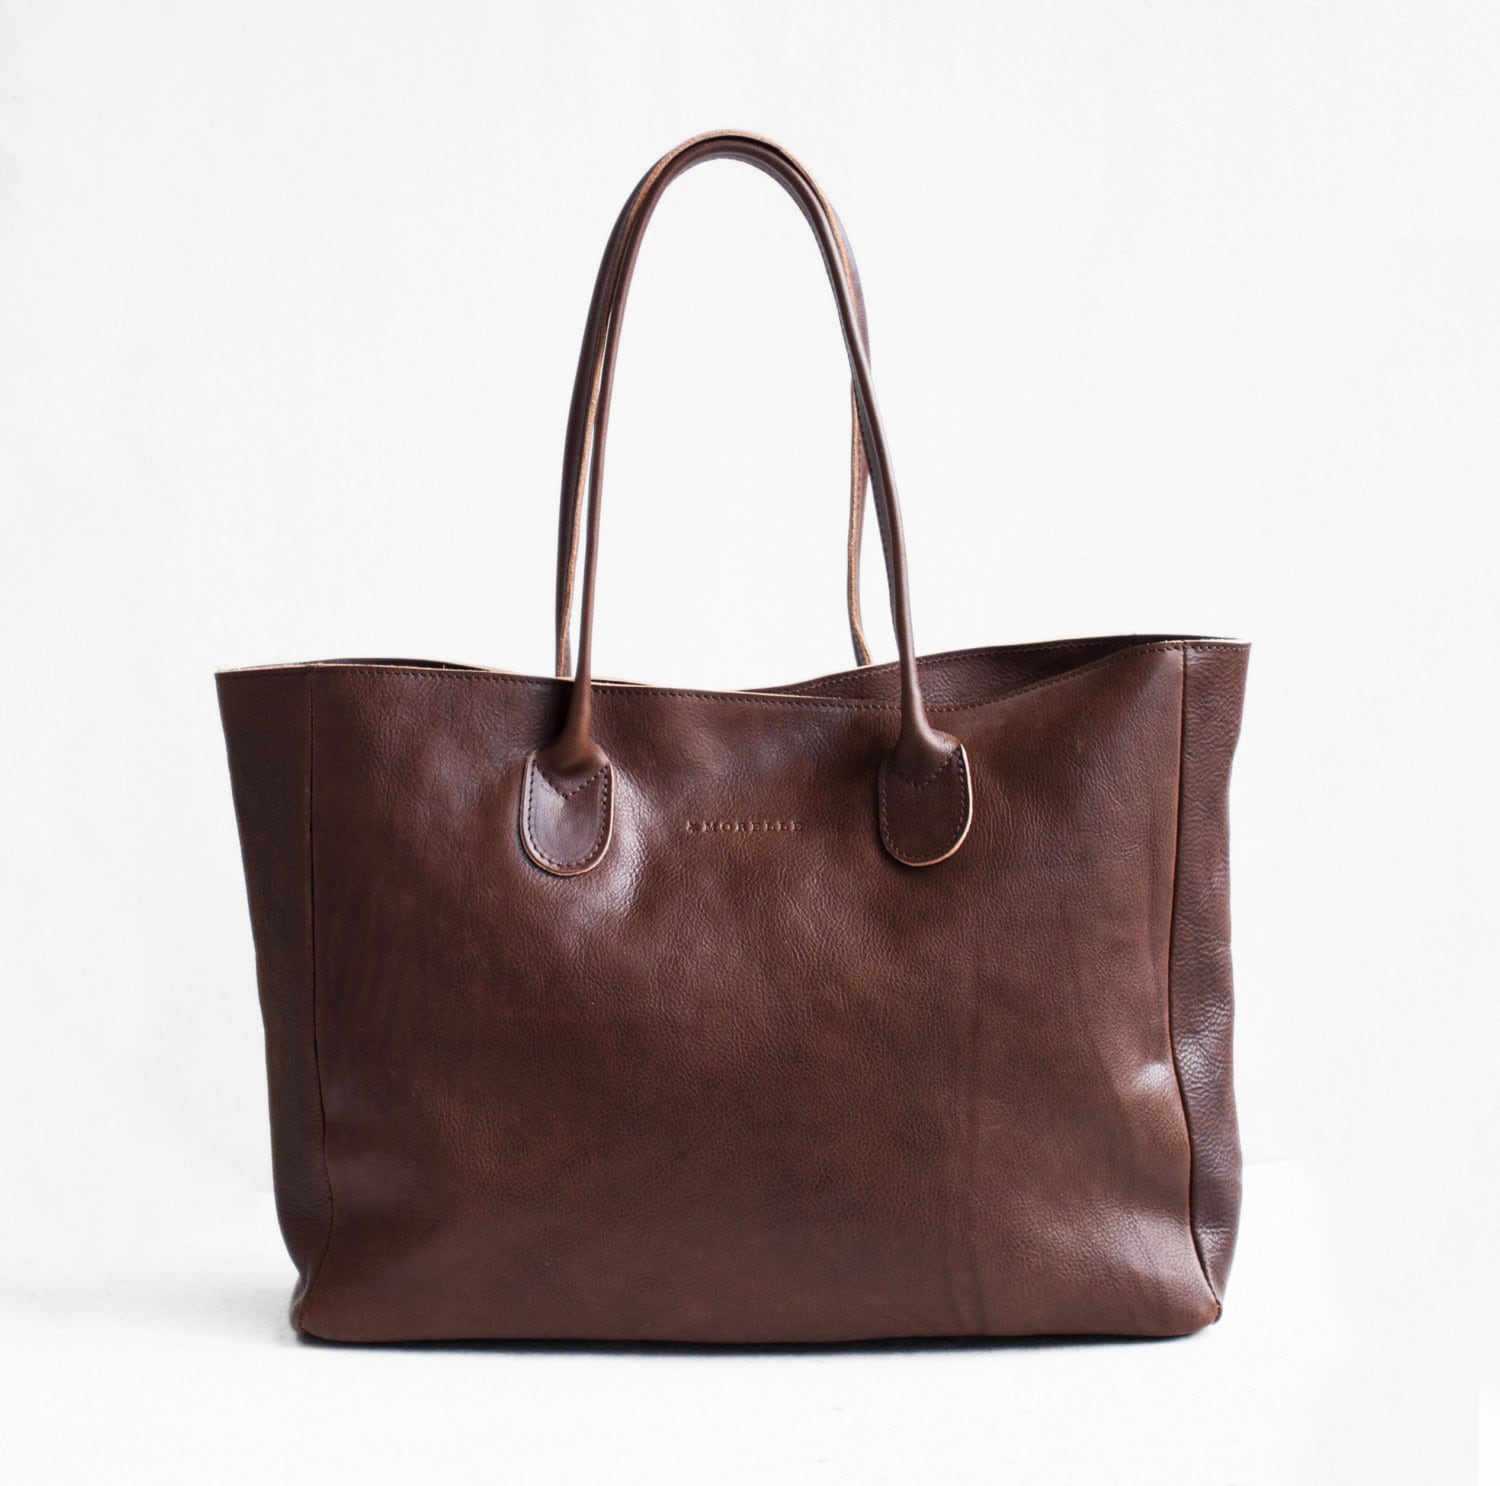 Leather Shopper in Chestnut Brown / Brown Leather Tote